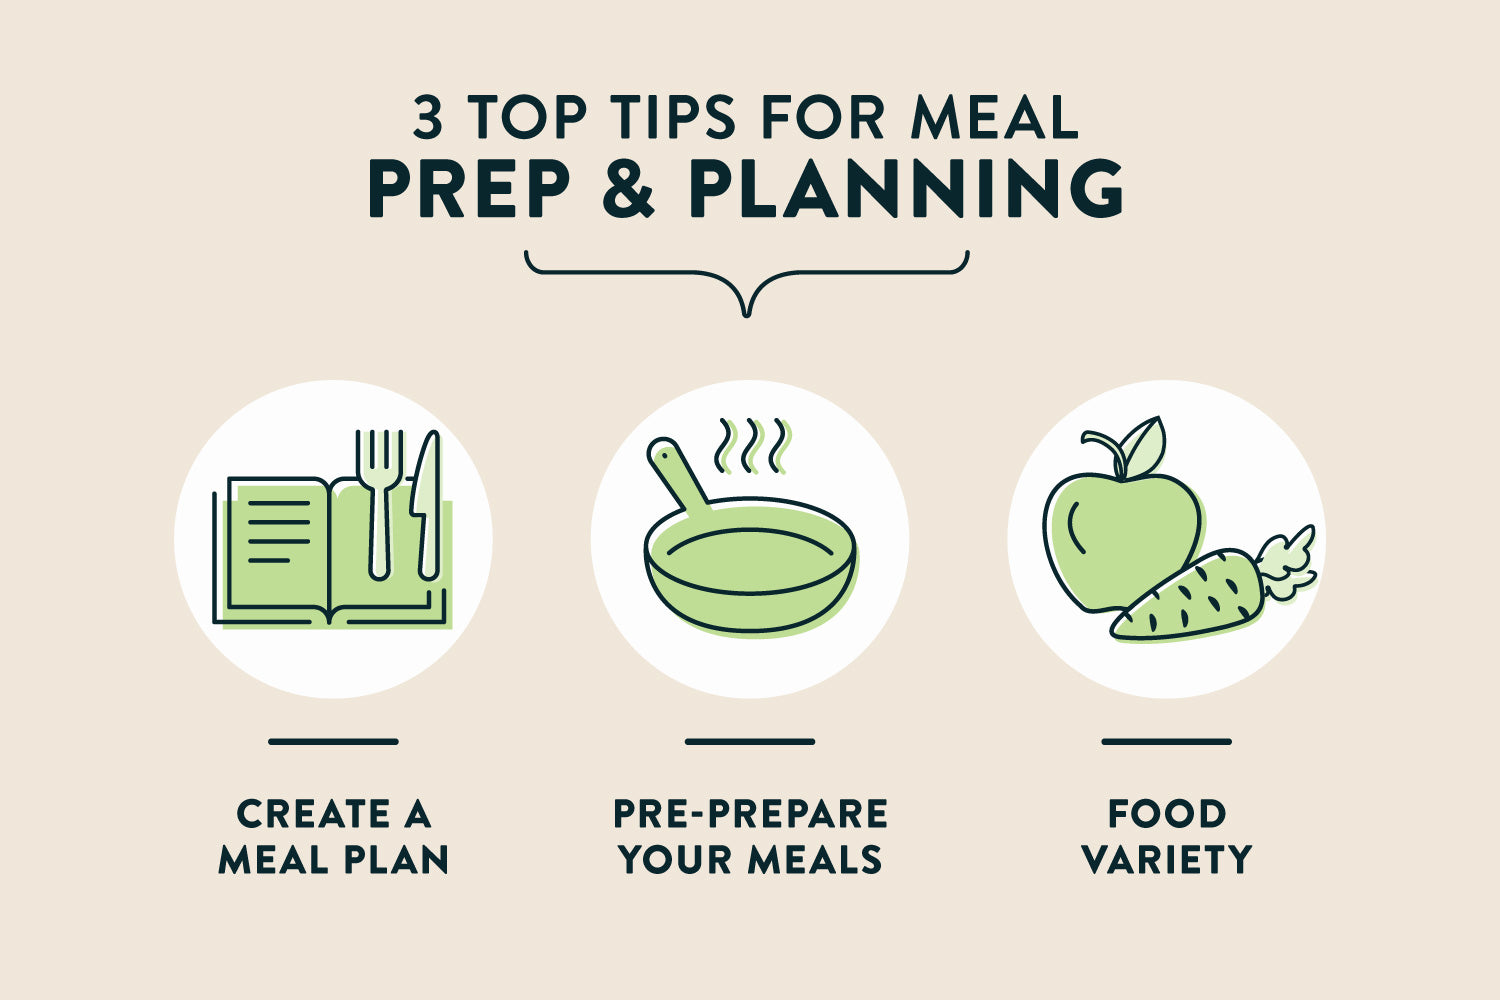 Step by Step Guidance on How to Portion Your Meal Prep Using a